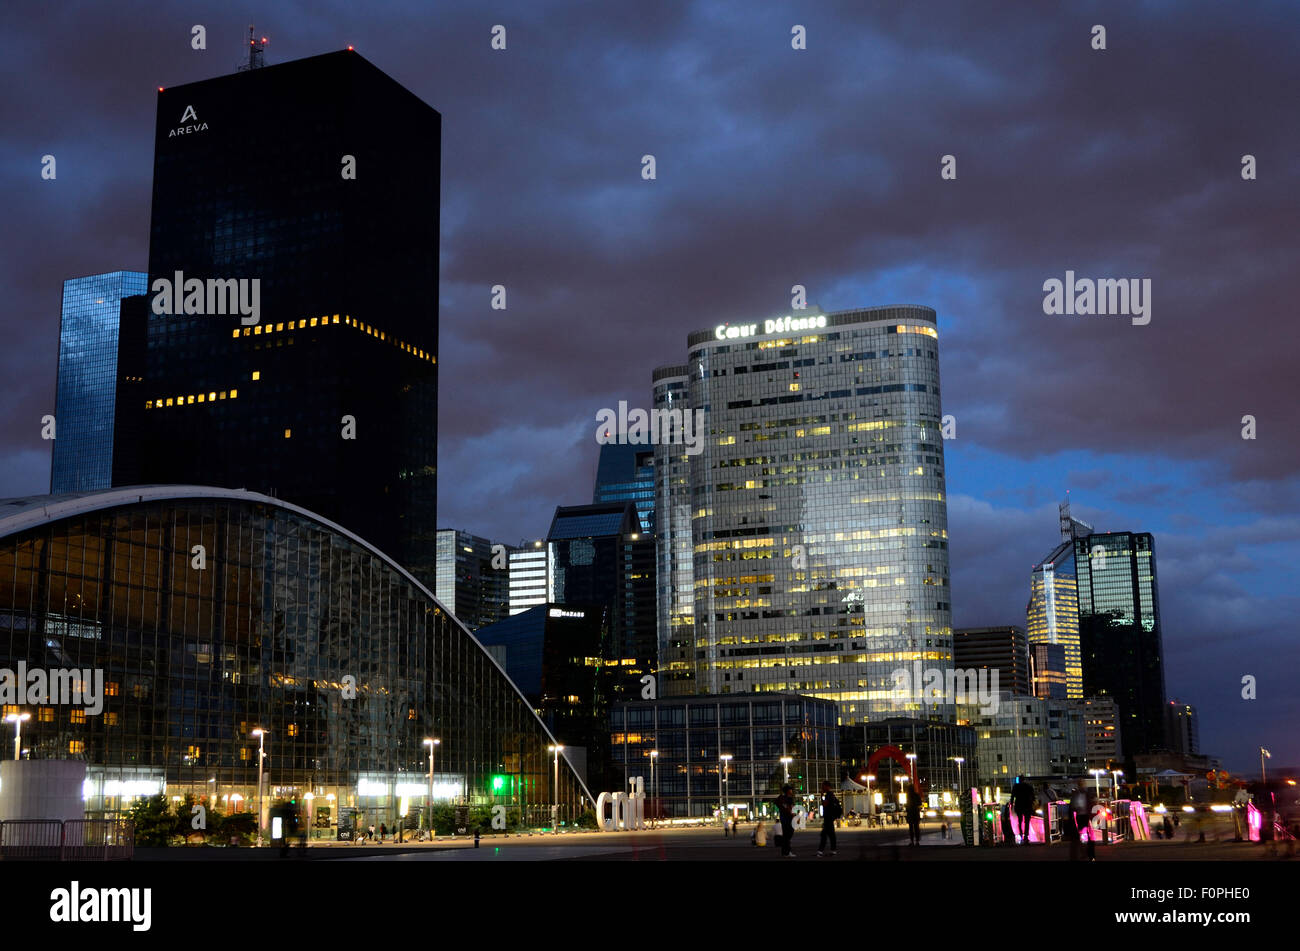 The La Defense business district in Paris pictured at night. Stock Photo